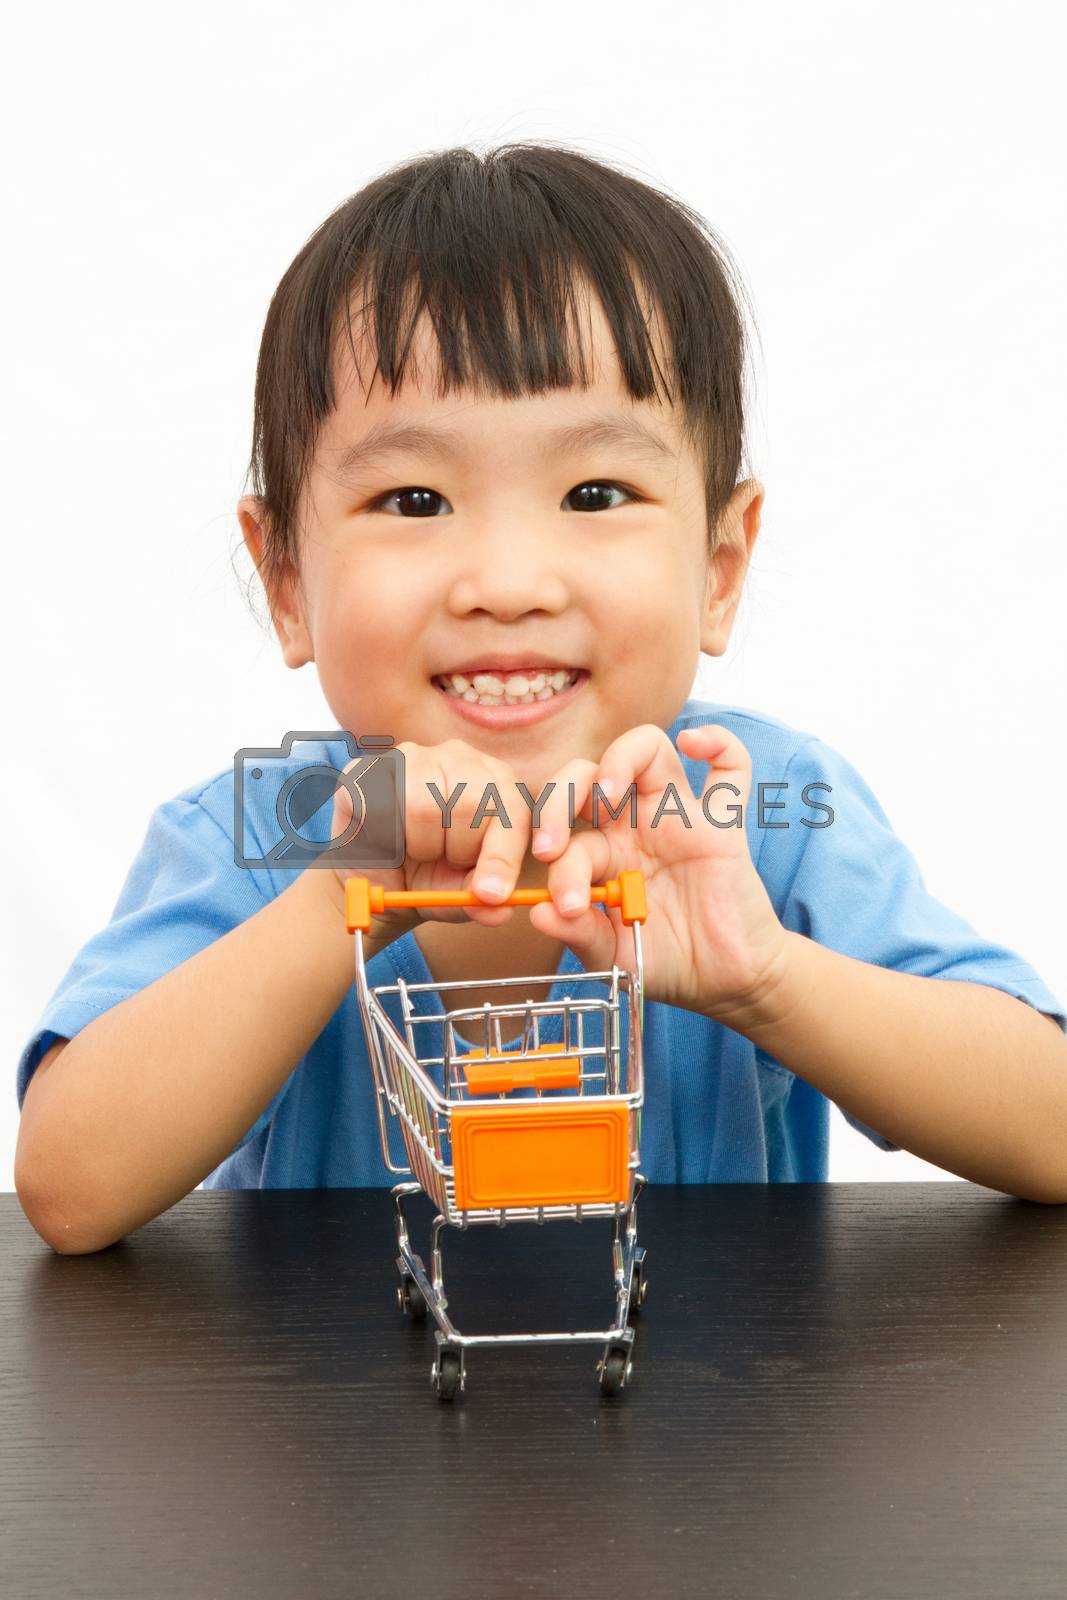 Royalty free image of Chinese little girl pushing a toy shopping cart by kiankhoon